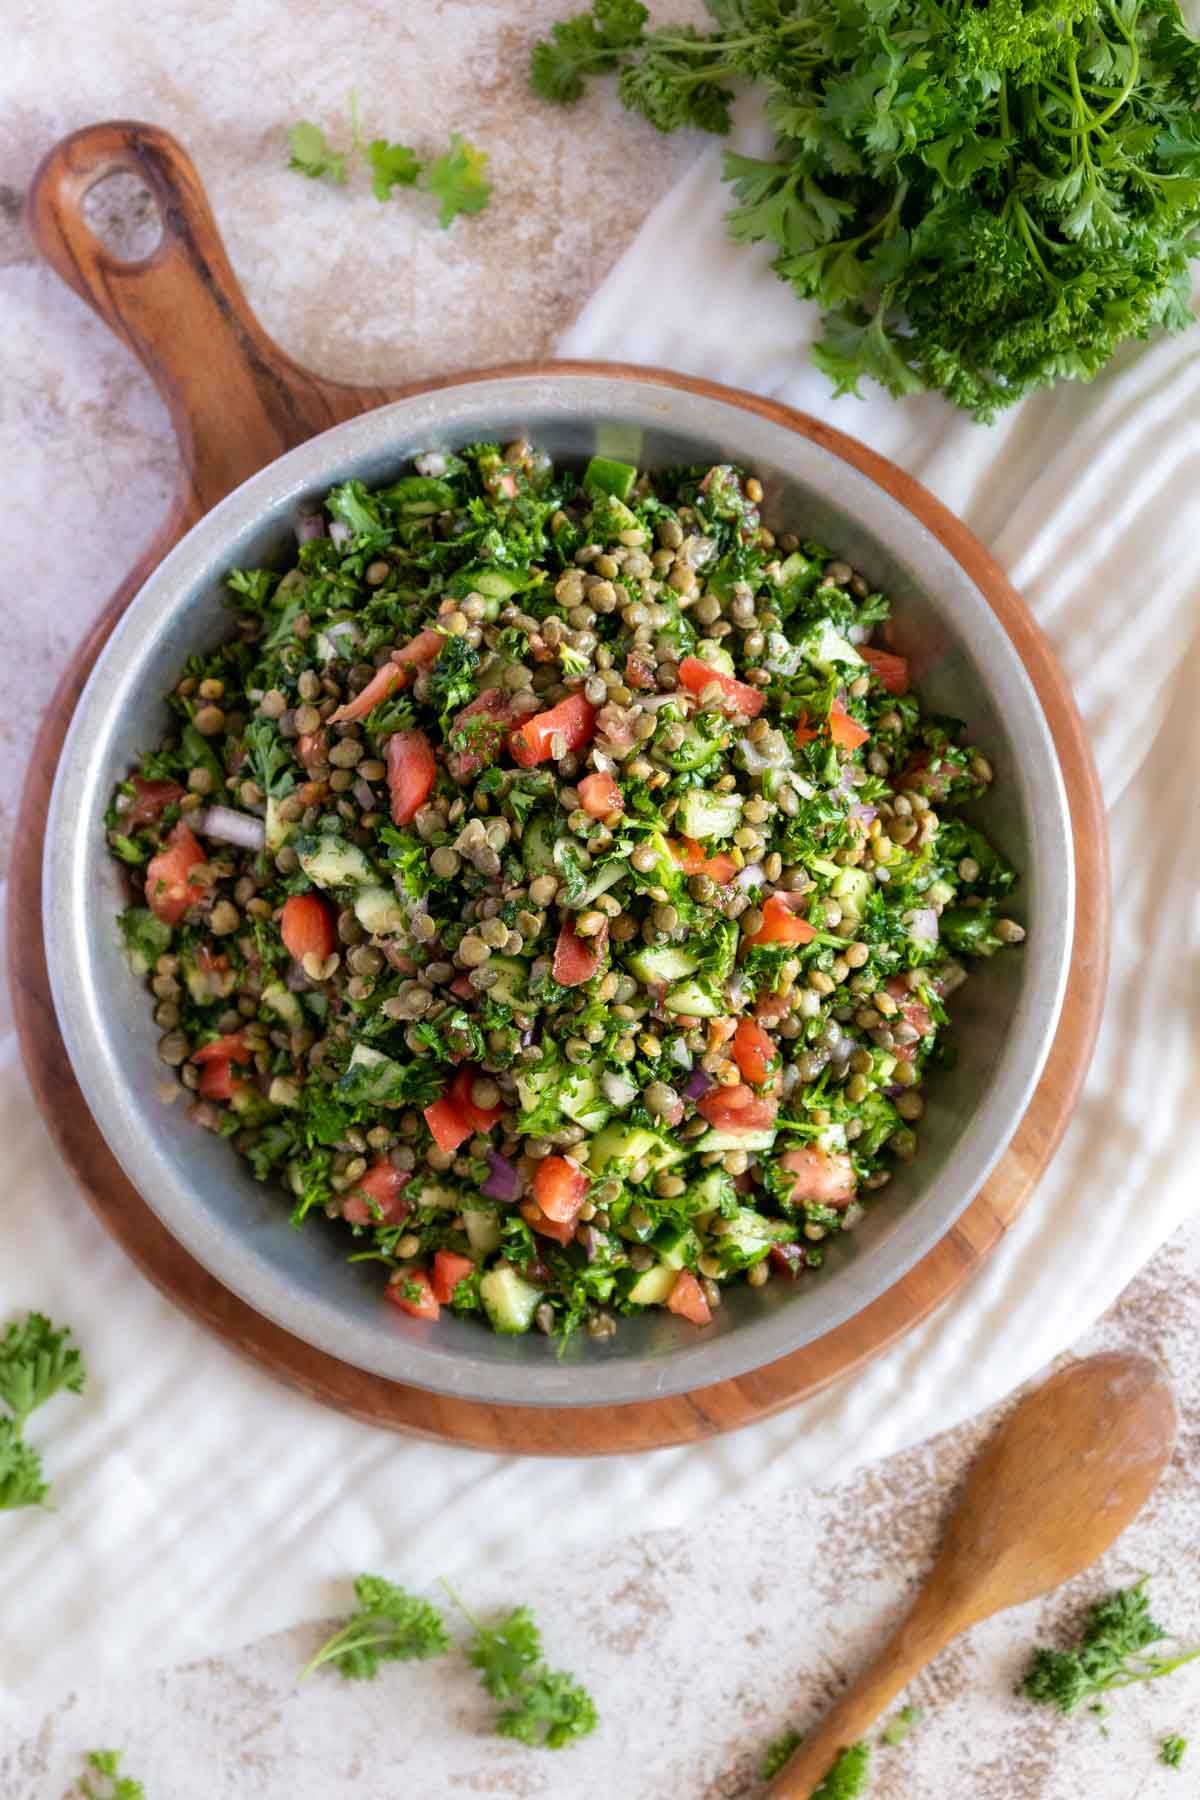 Flavorful Lentil Tabbouleh Salad in a gray bowl.